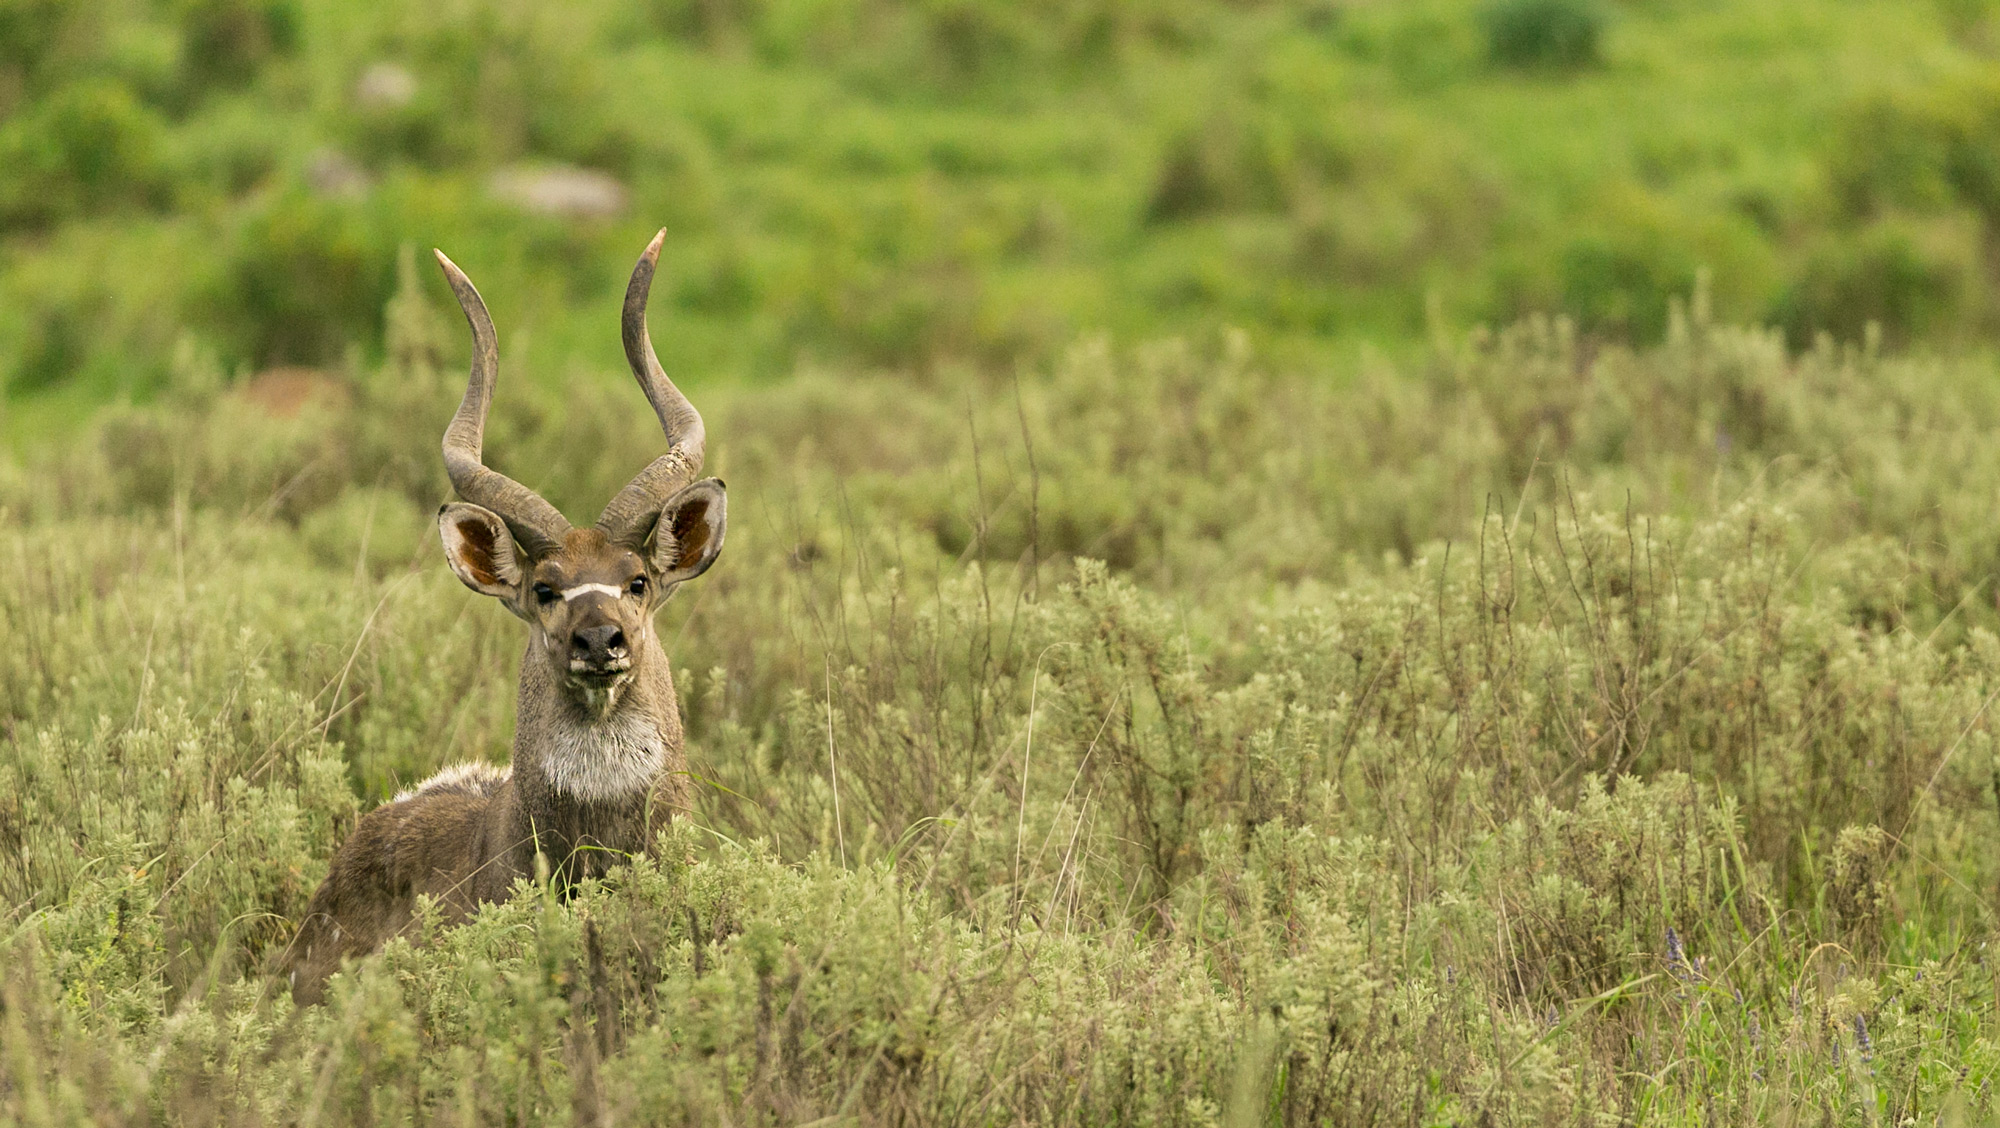 A mountain nyala, also known as a balbok, spotted in Bale Mountains National Park © Christian Boix